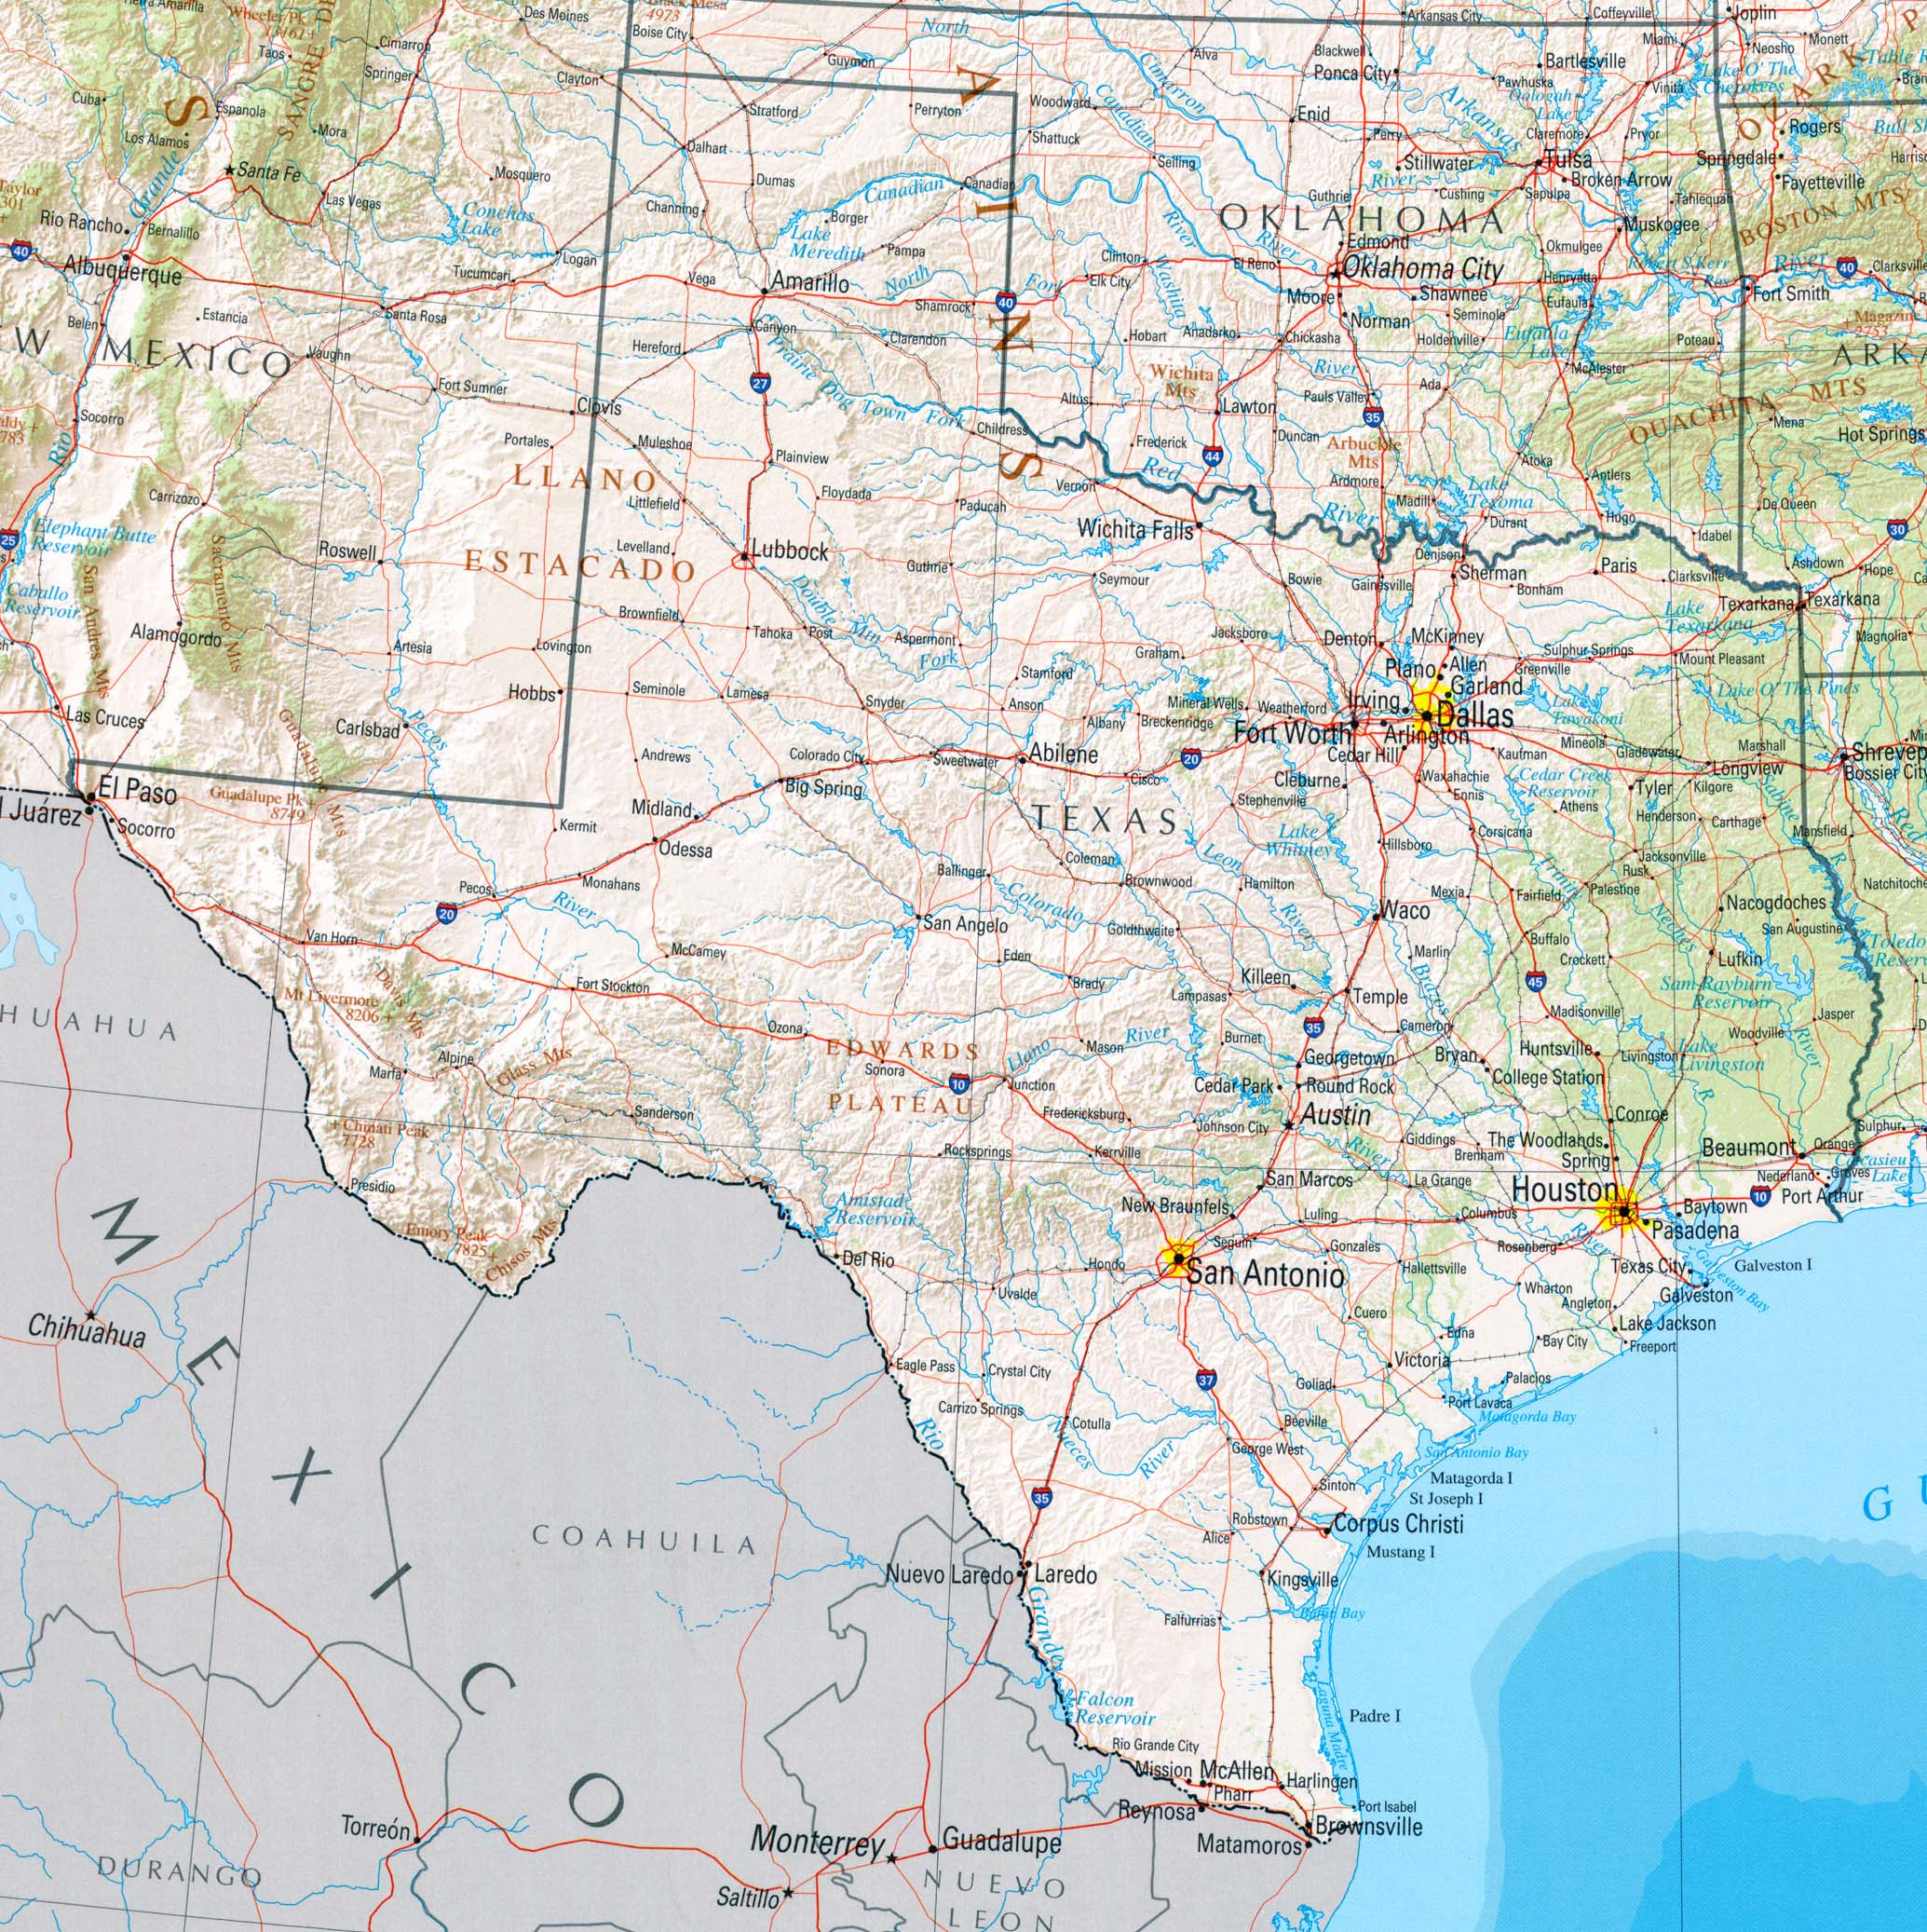 Texas Maps - Perry-Castañeda Map Collection - Ut Library Online - Google Maps Texas